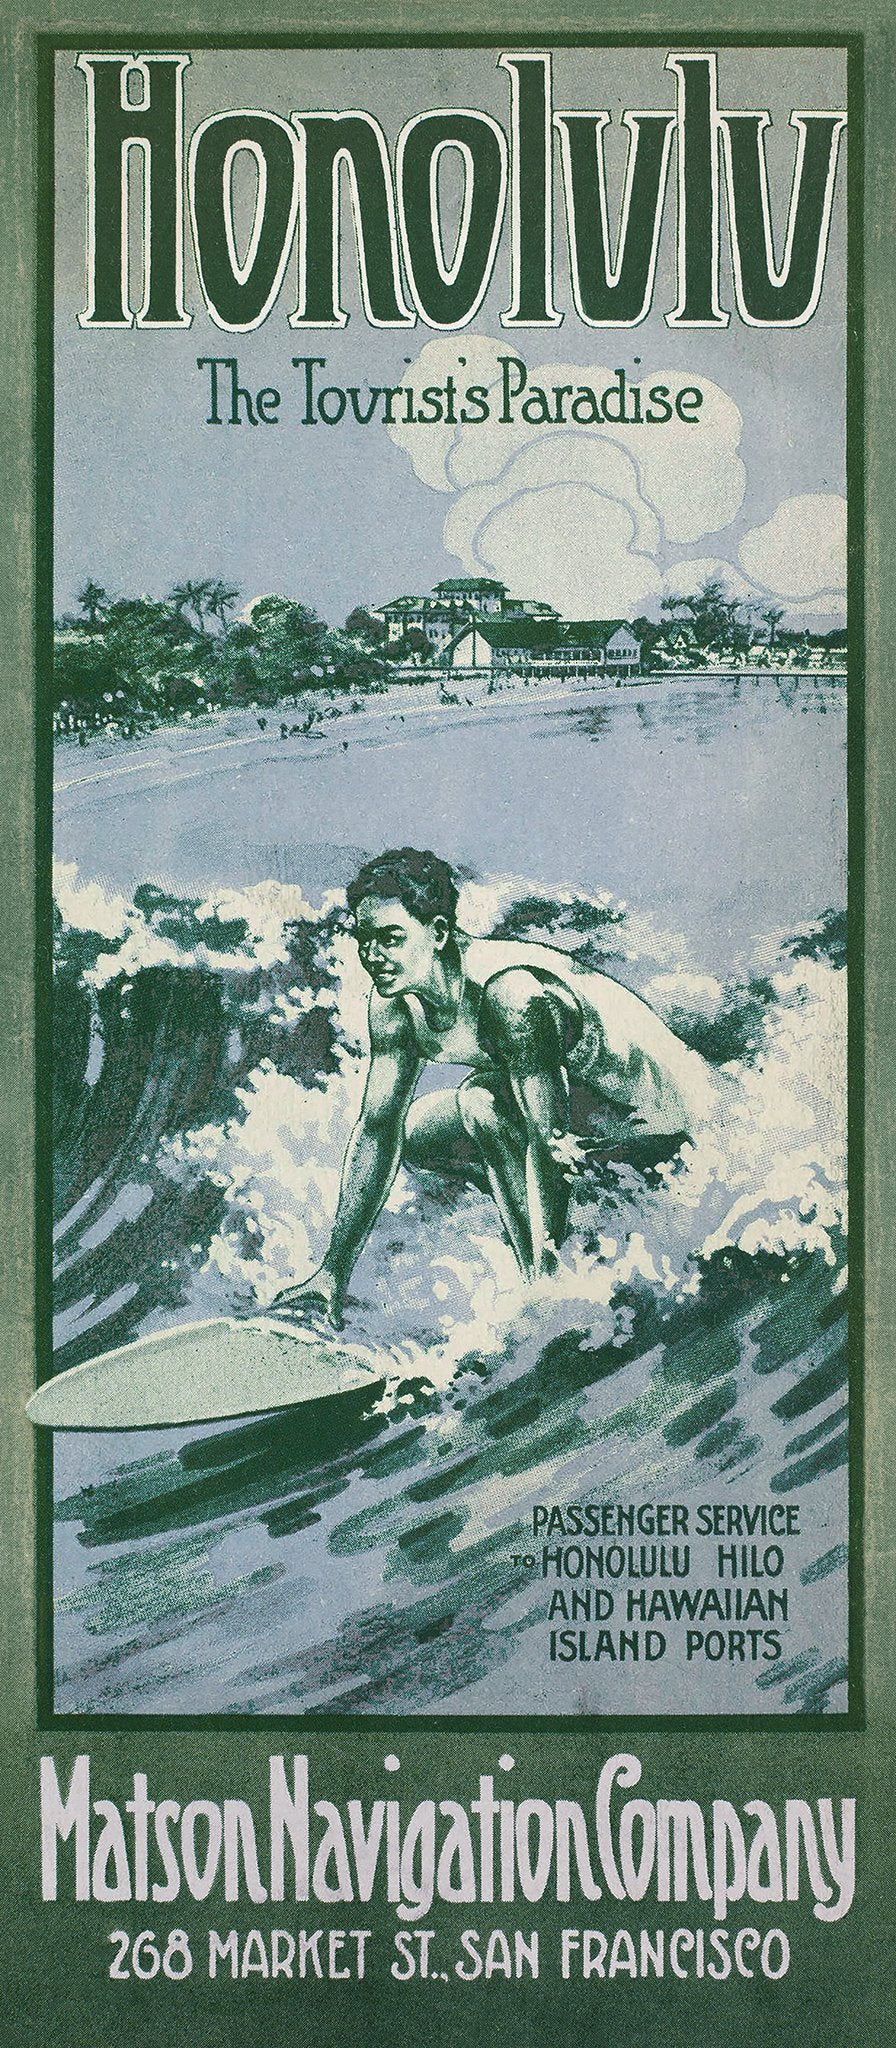 Vintage travel brochure illustration in shades of blue of a man crouching on a surfboard riding a wave. “Honolulu the Tourist’s Paradise” written at the top, “Matson Navigation Company 268 Market St., San Francisco” written at the bottom.  